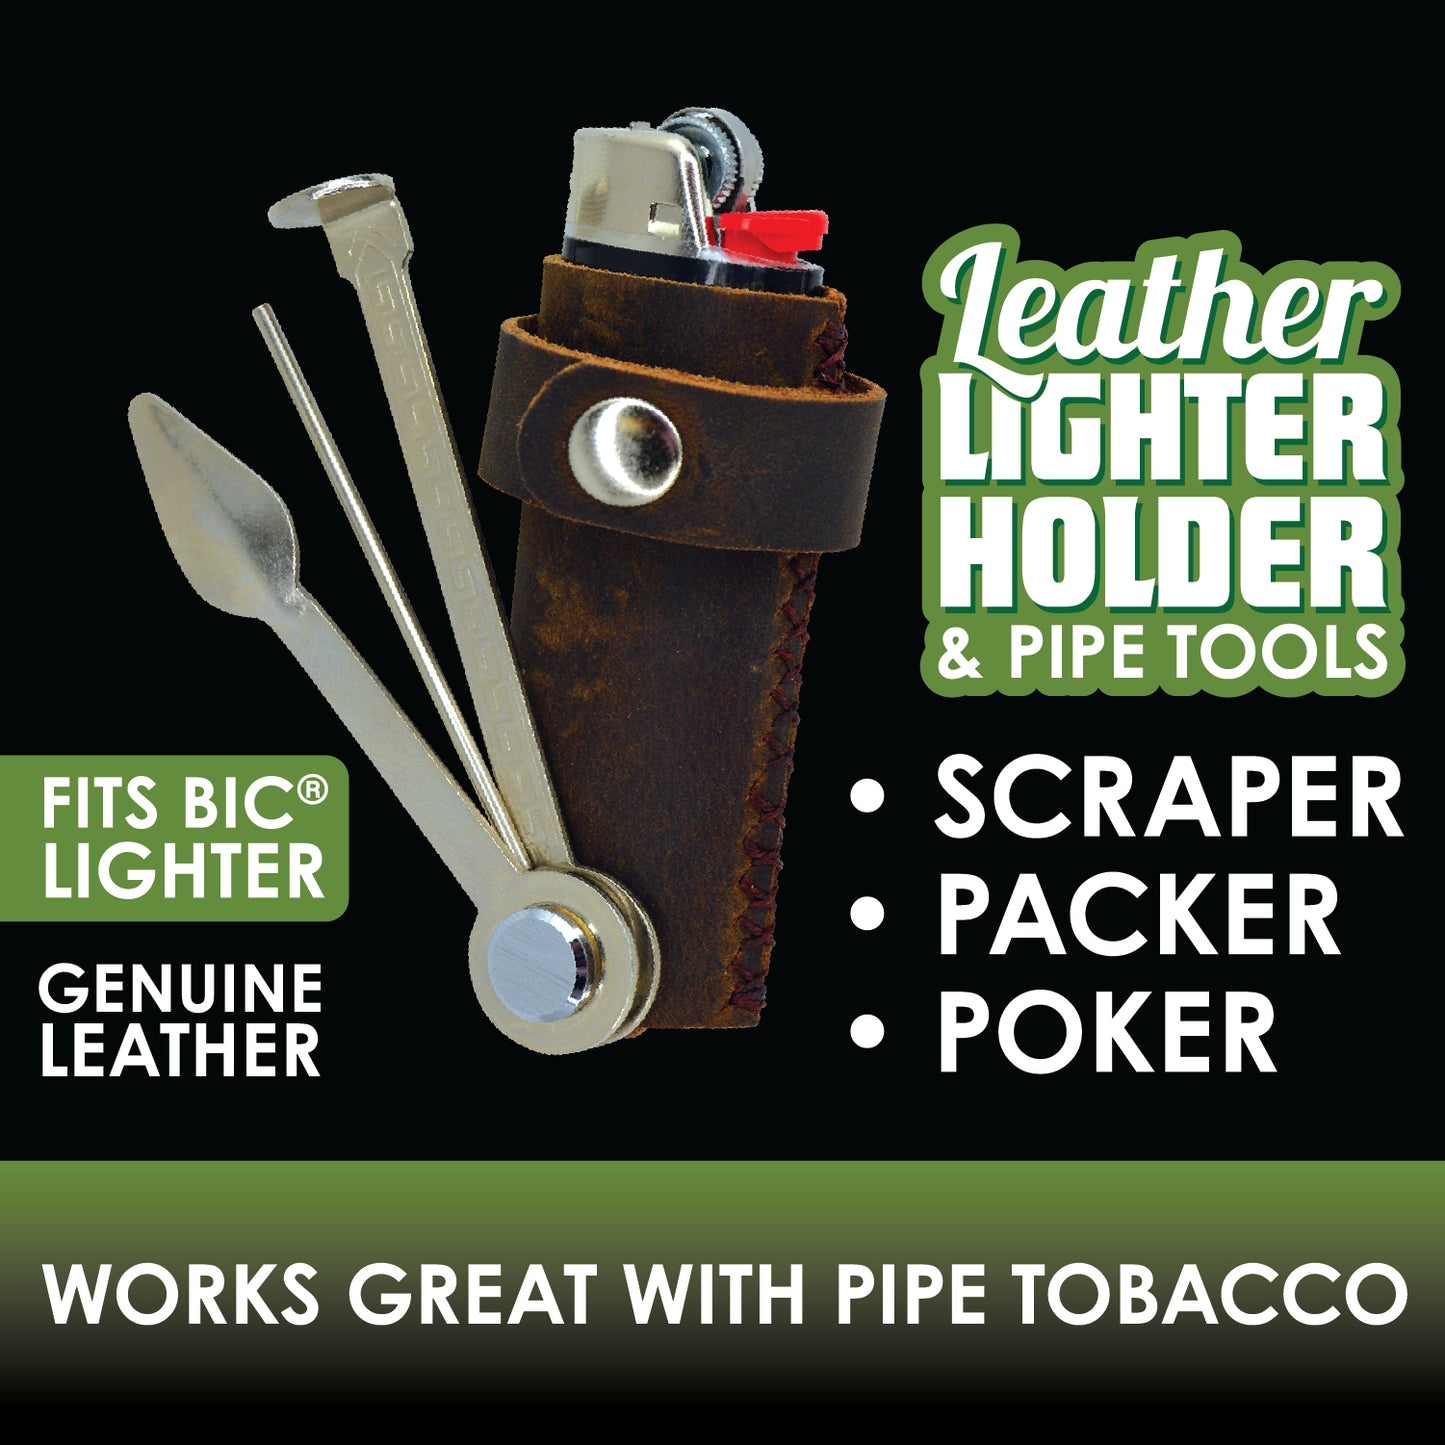 ITEM NUMBER 025592 LEATHER LIGHTER CASEW/TOOLS 6 PIECES PER DISPLAY